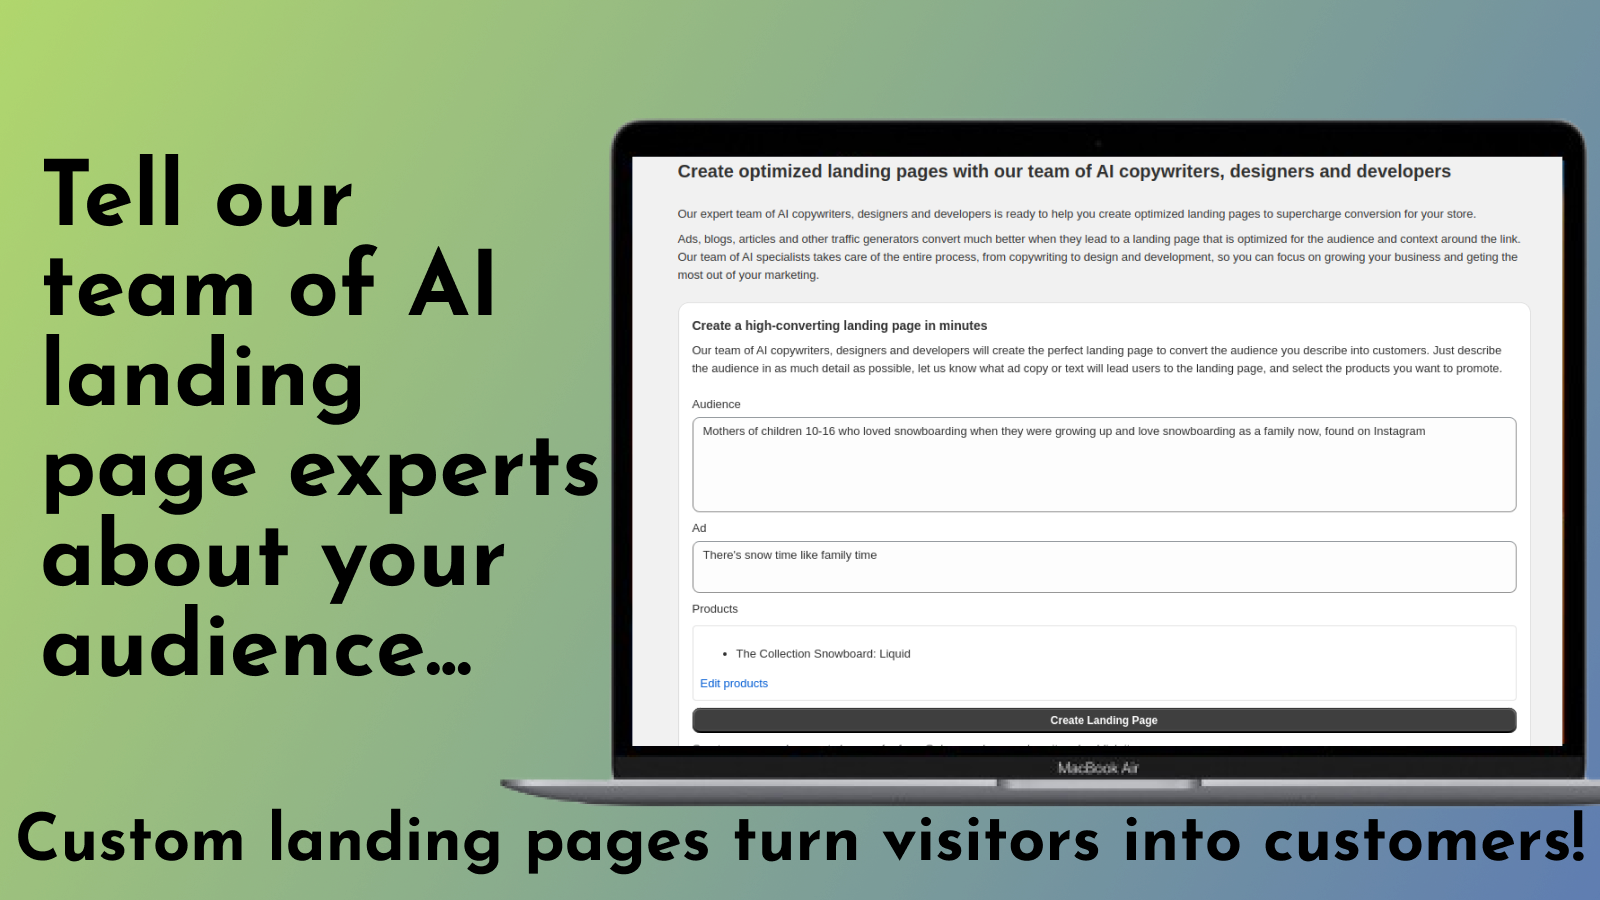 Tell our team of AI landing page experts about your audience